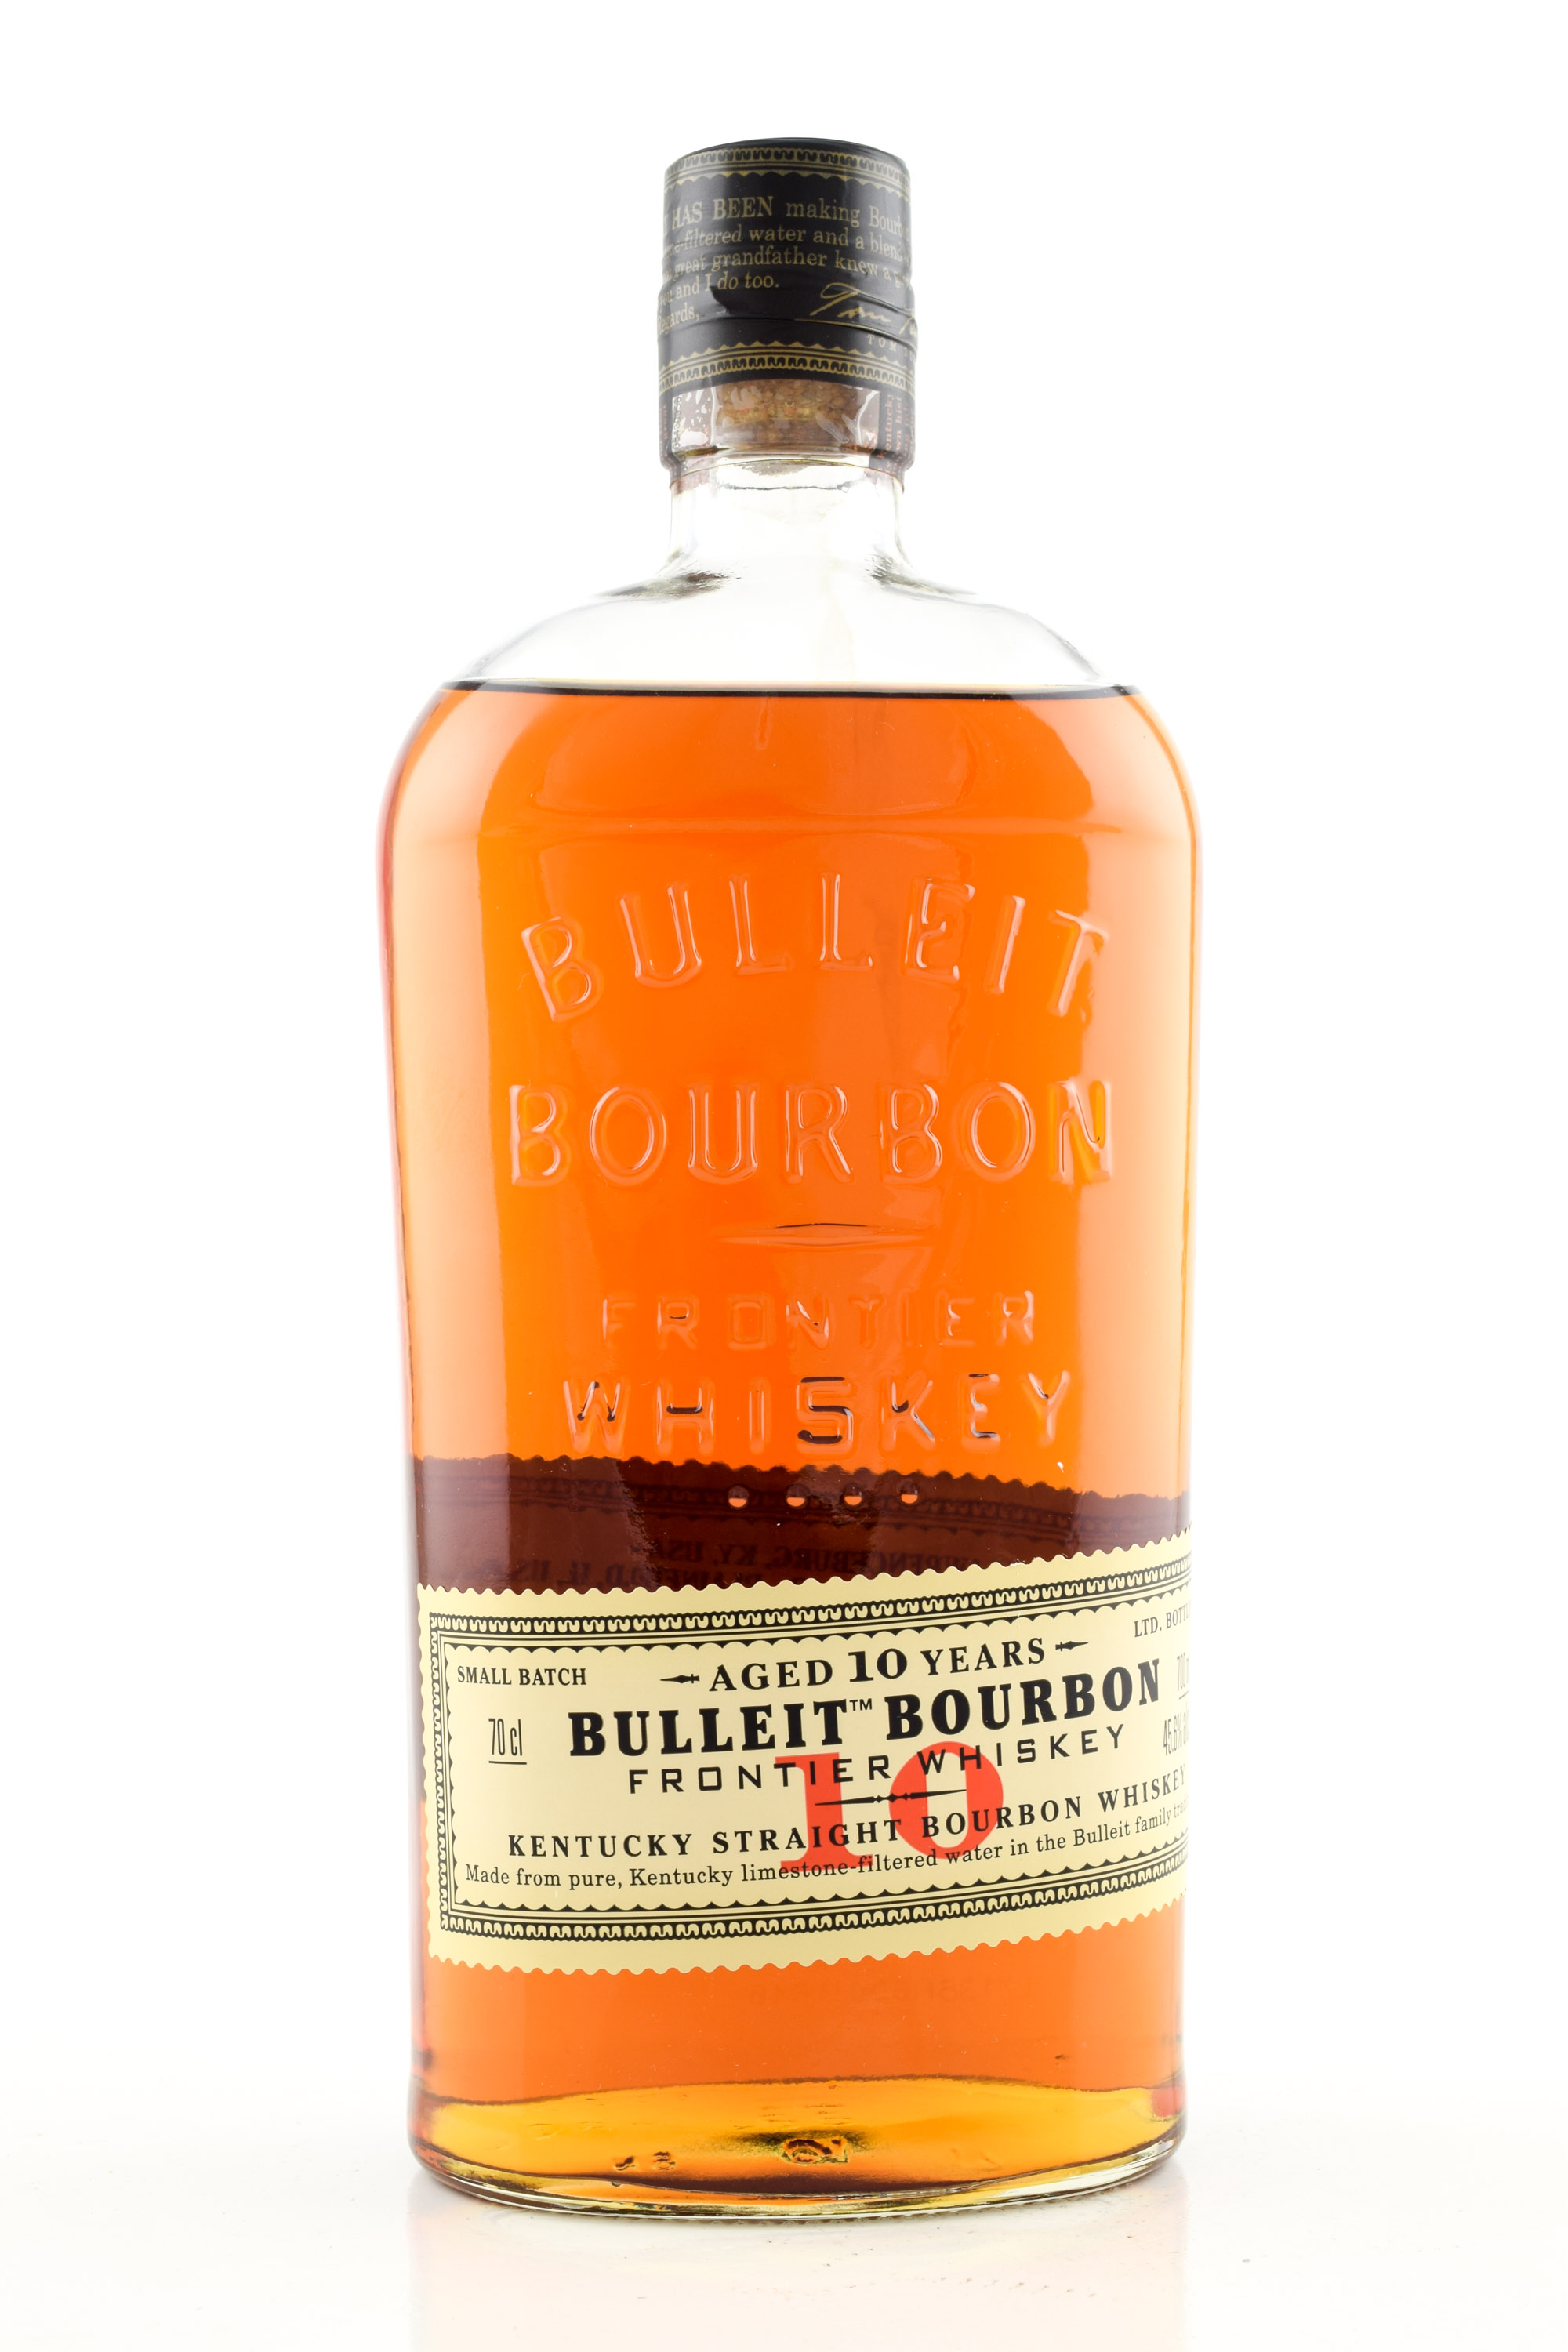 Bulleit Bourbon at Home >> Kentucky Year of Old 10 Straight Malts | Home explore of Malts Bourbon now